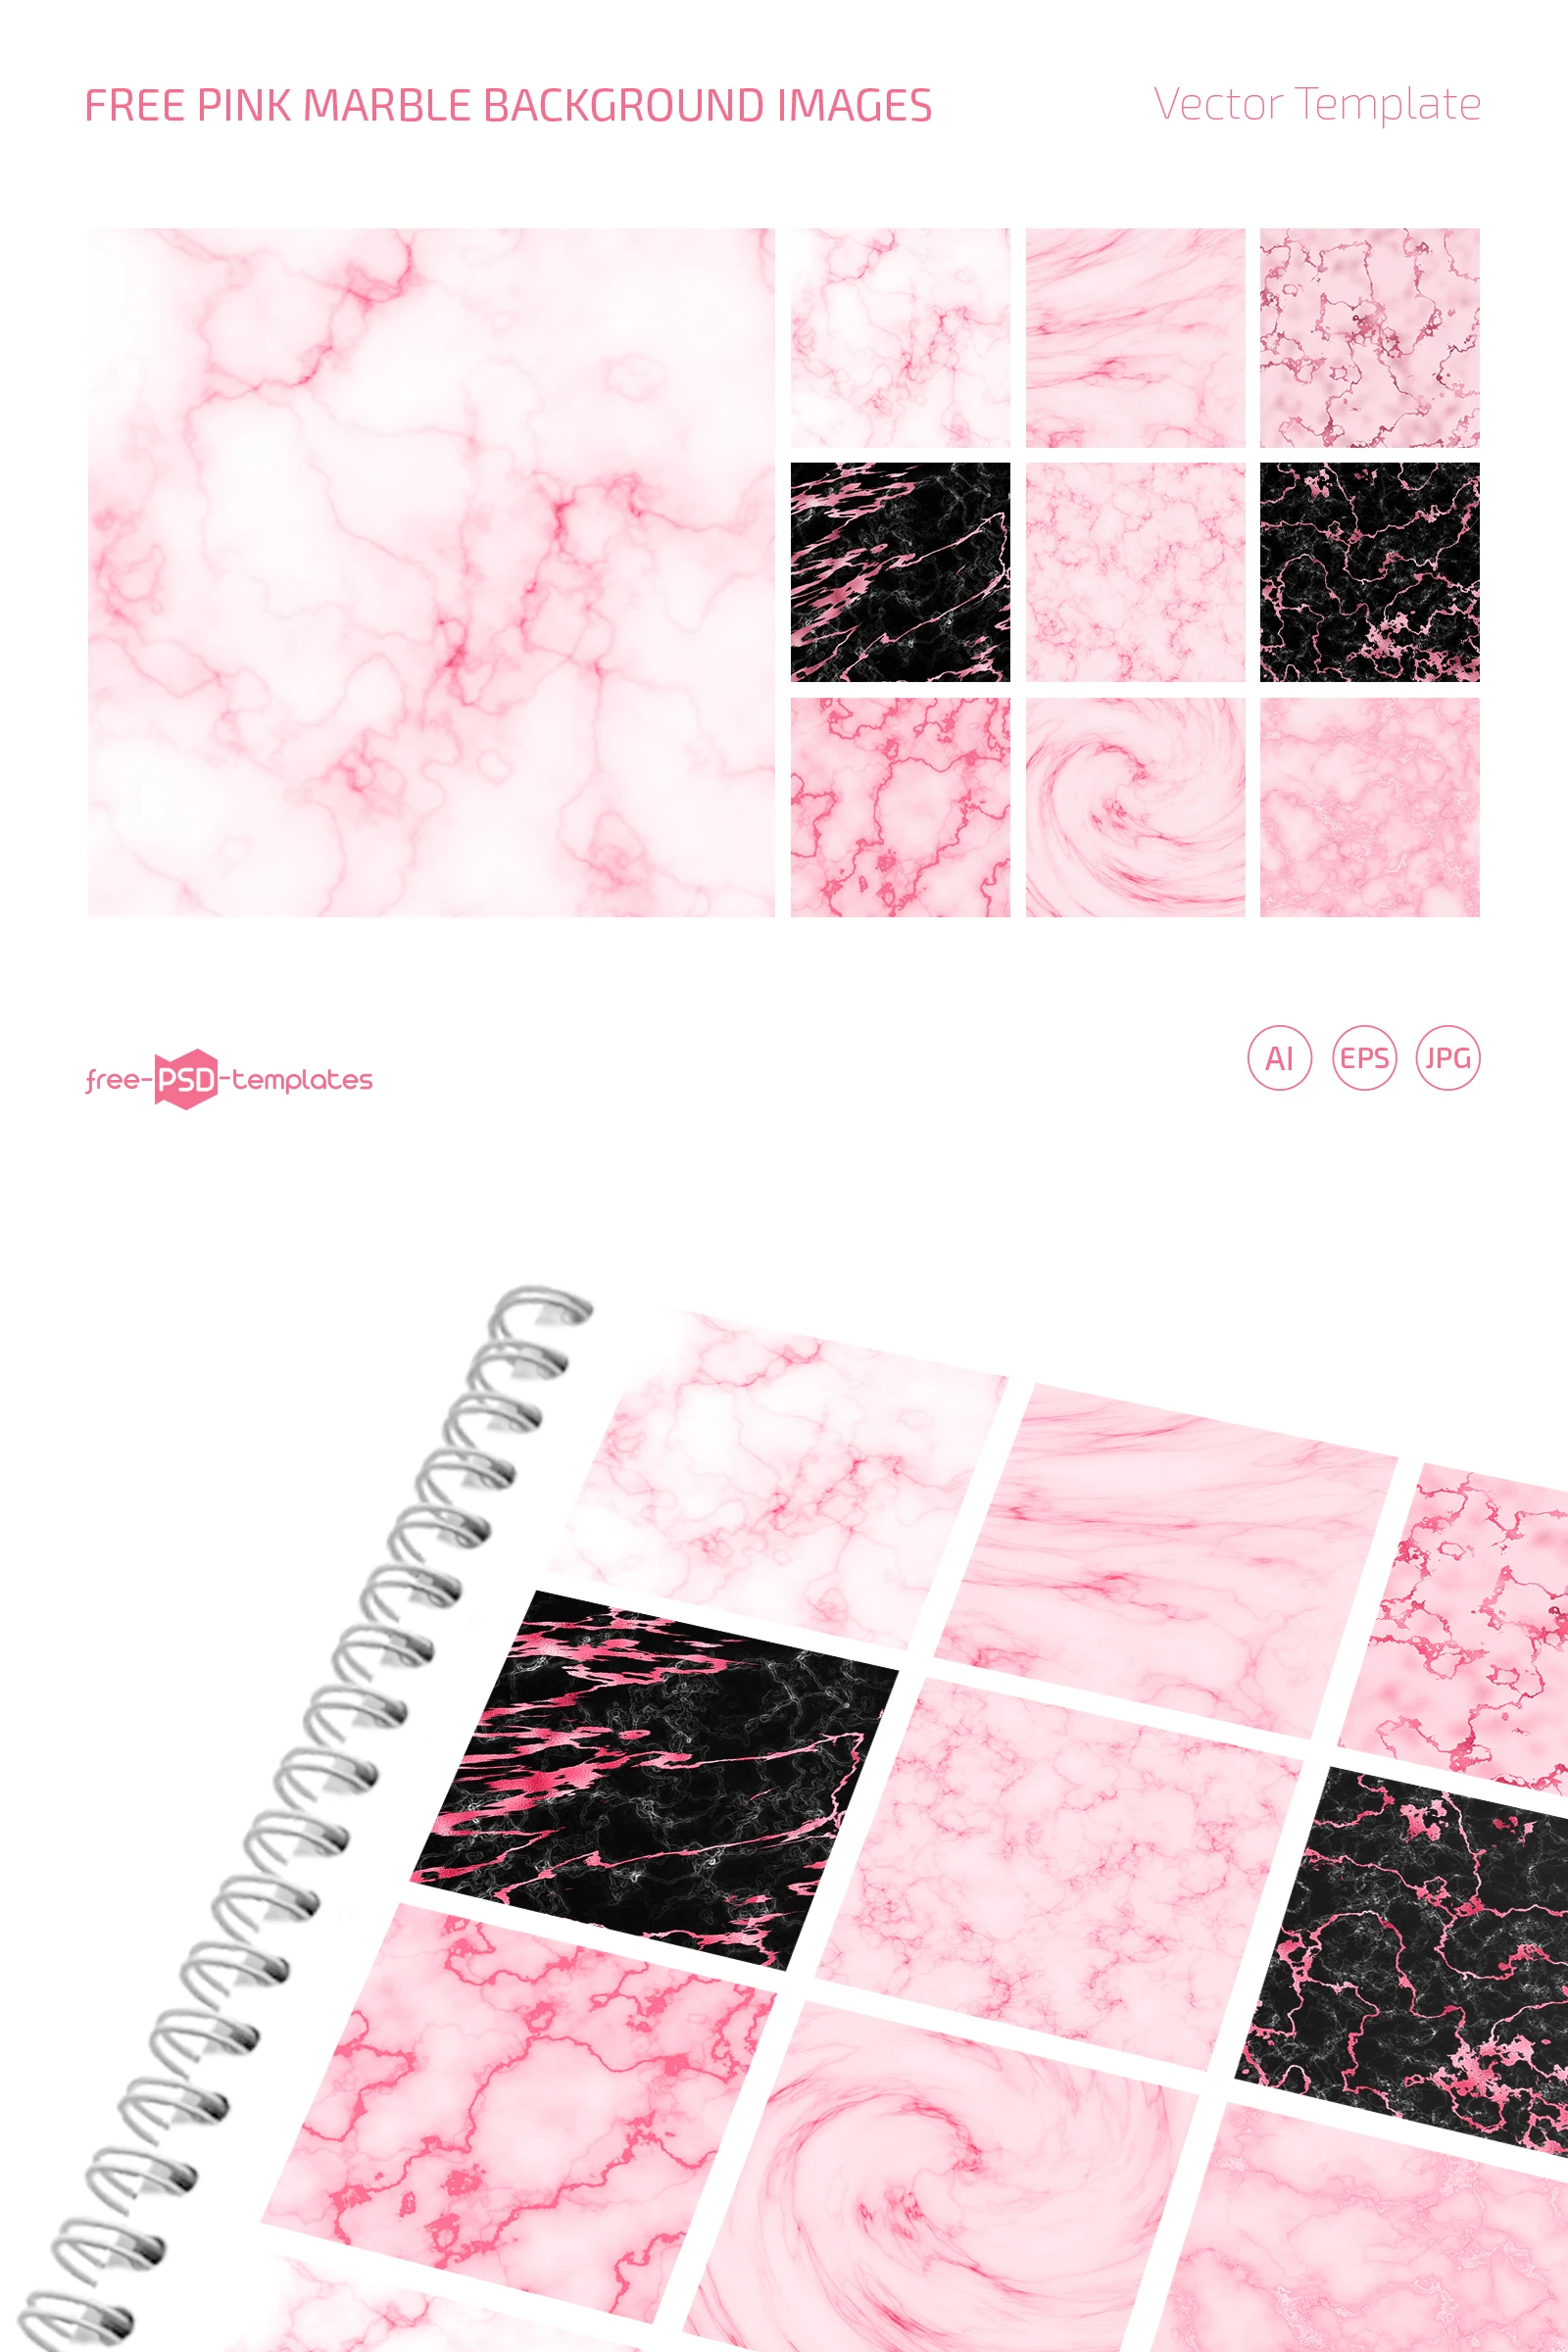 Free Pink Marble Background Images